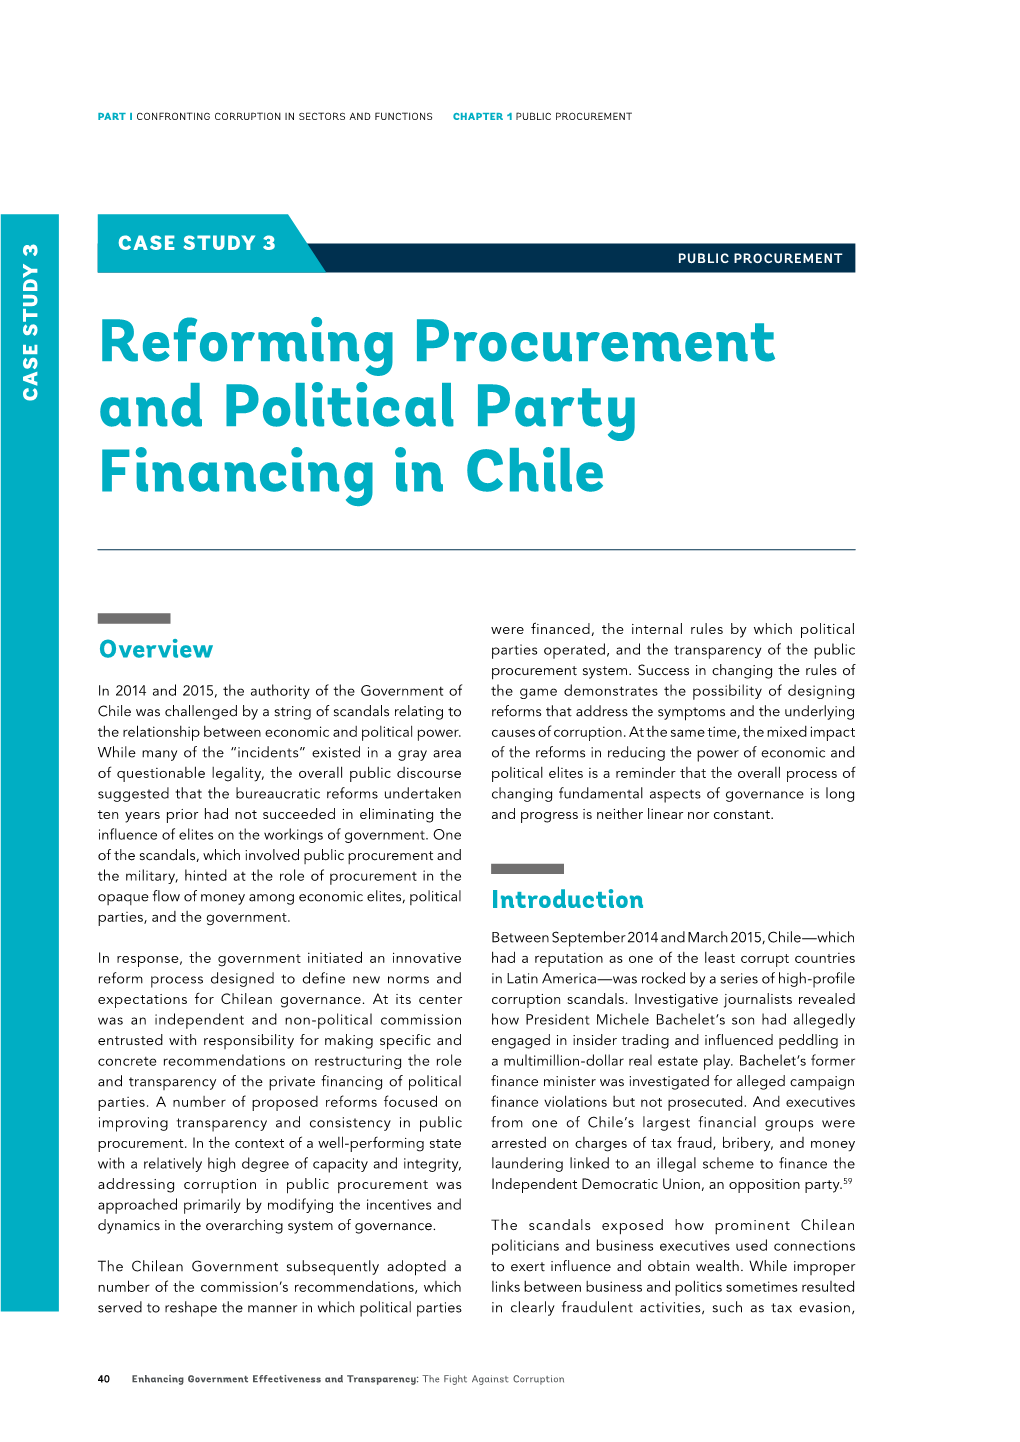 Reforming Procurement and Political Party Financing in Chile